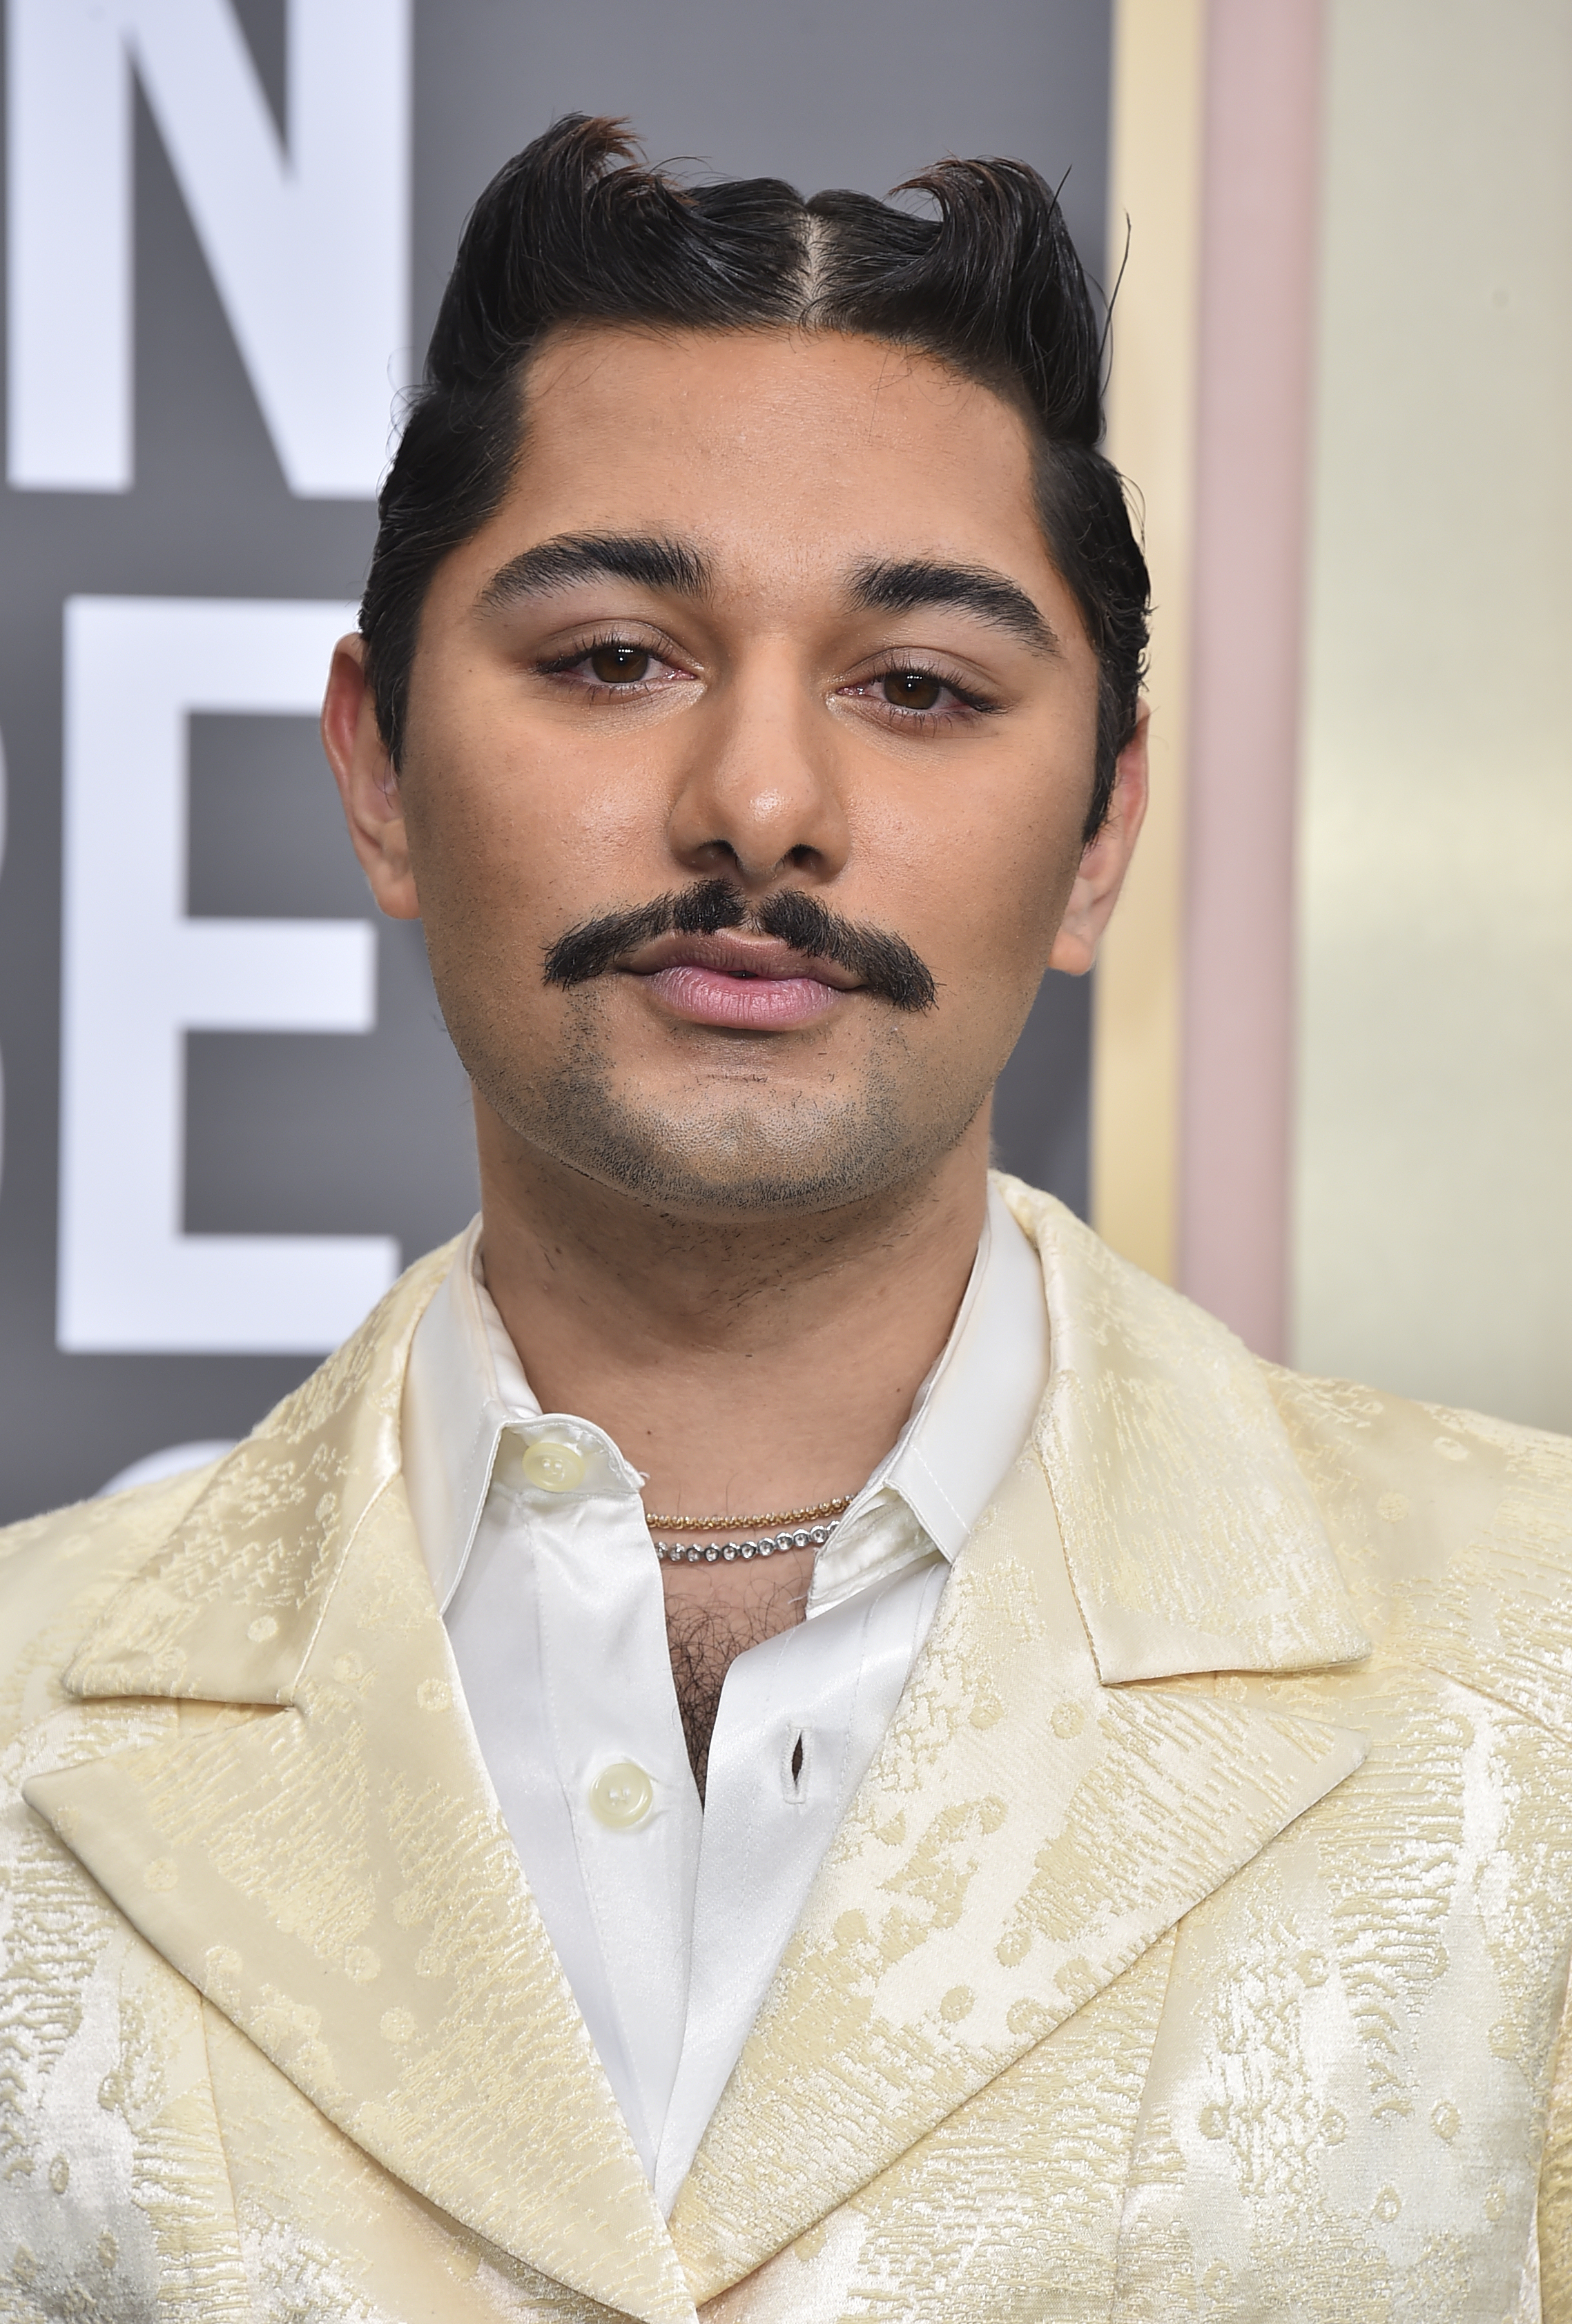 Mark Indelicato arrives at the 80th annual Golden Globe Awards at the Beverly Hilton Hotel on Tuesday, Jan. 10, 2023, in Beverly Hills, Calif. (Photo by Jordan Strauss/Invision/AP)